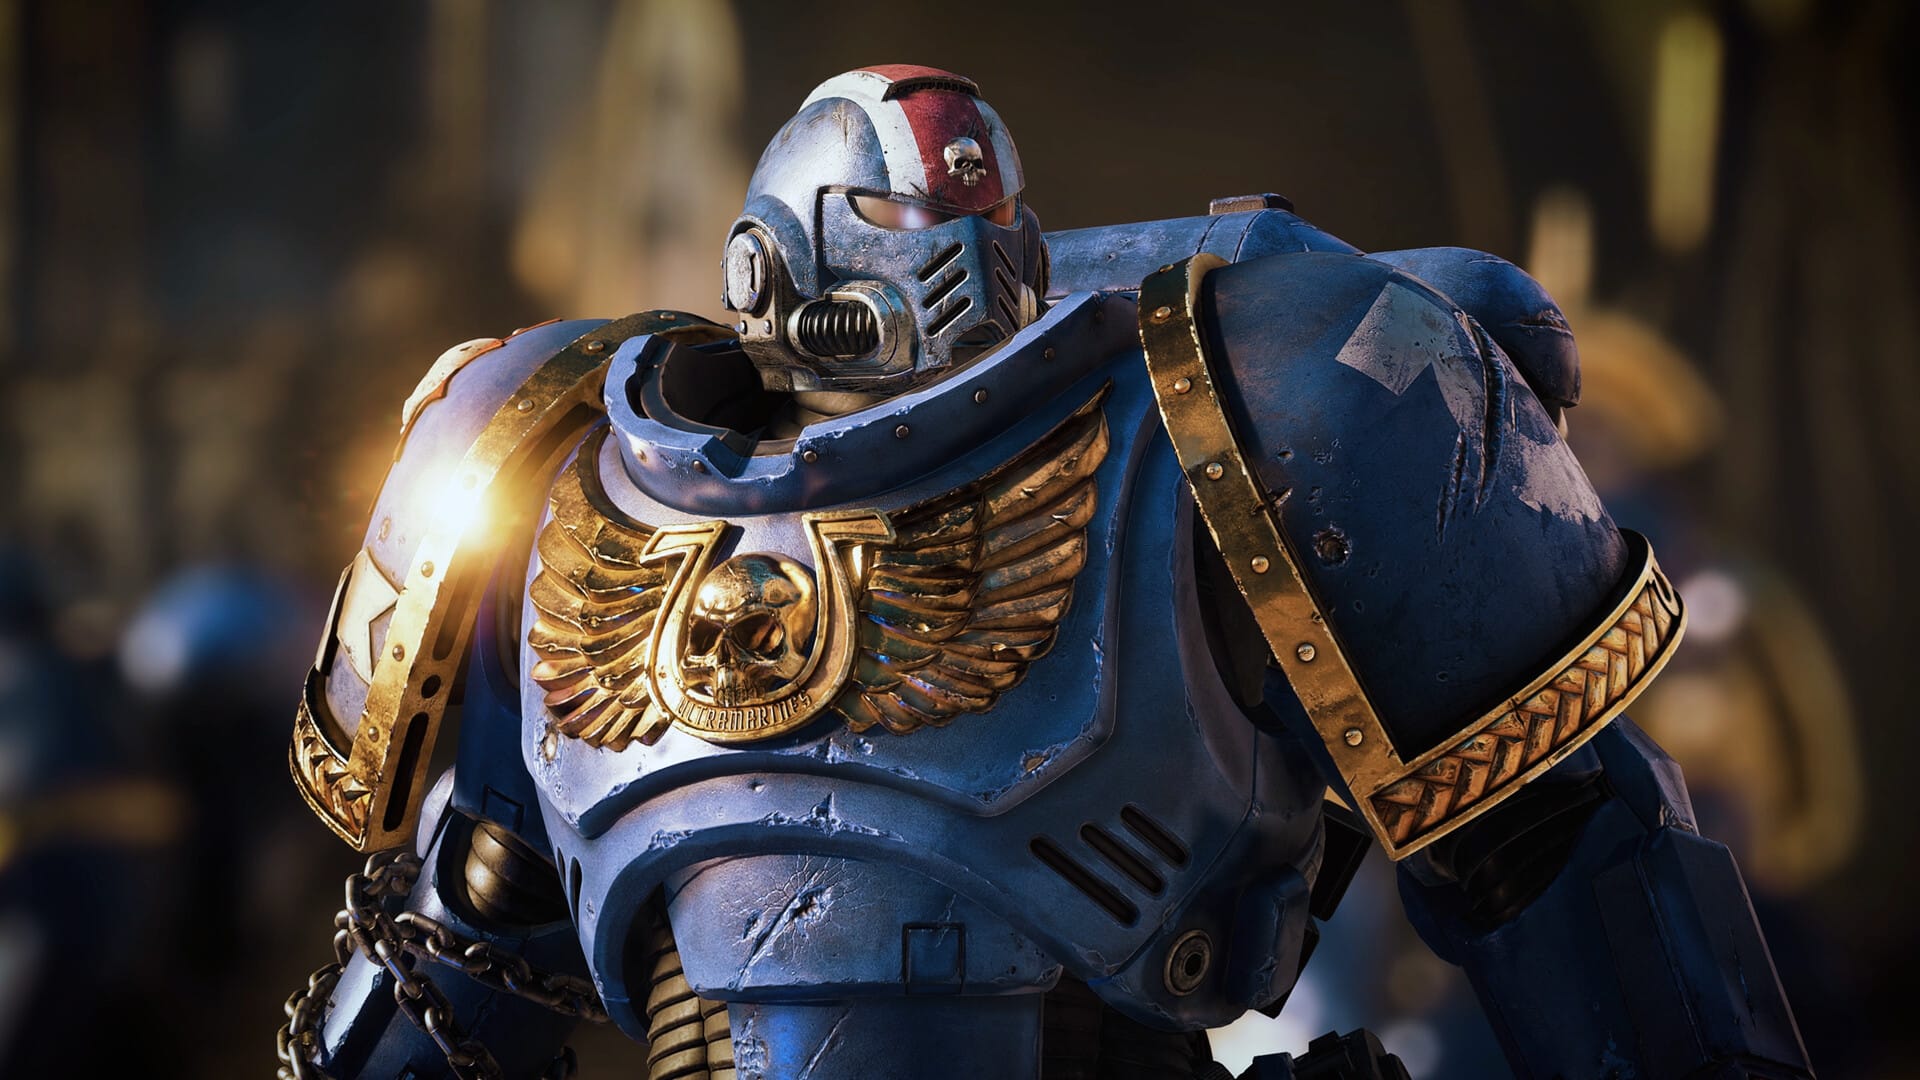 Warhammer 40k: Space Marine 2 Shows Spectacular Tyranid Carnage in Extensive Gameplay